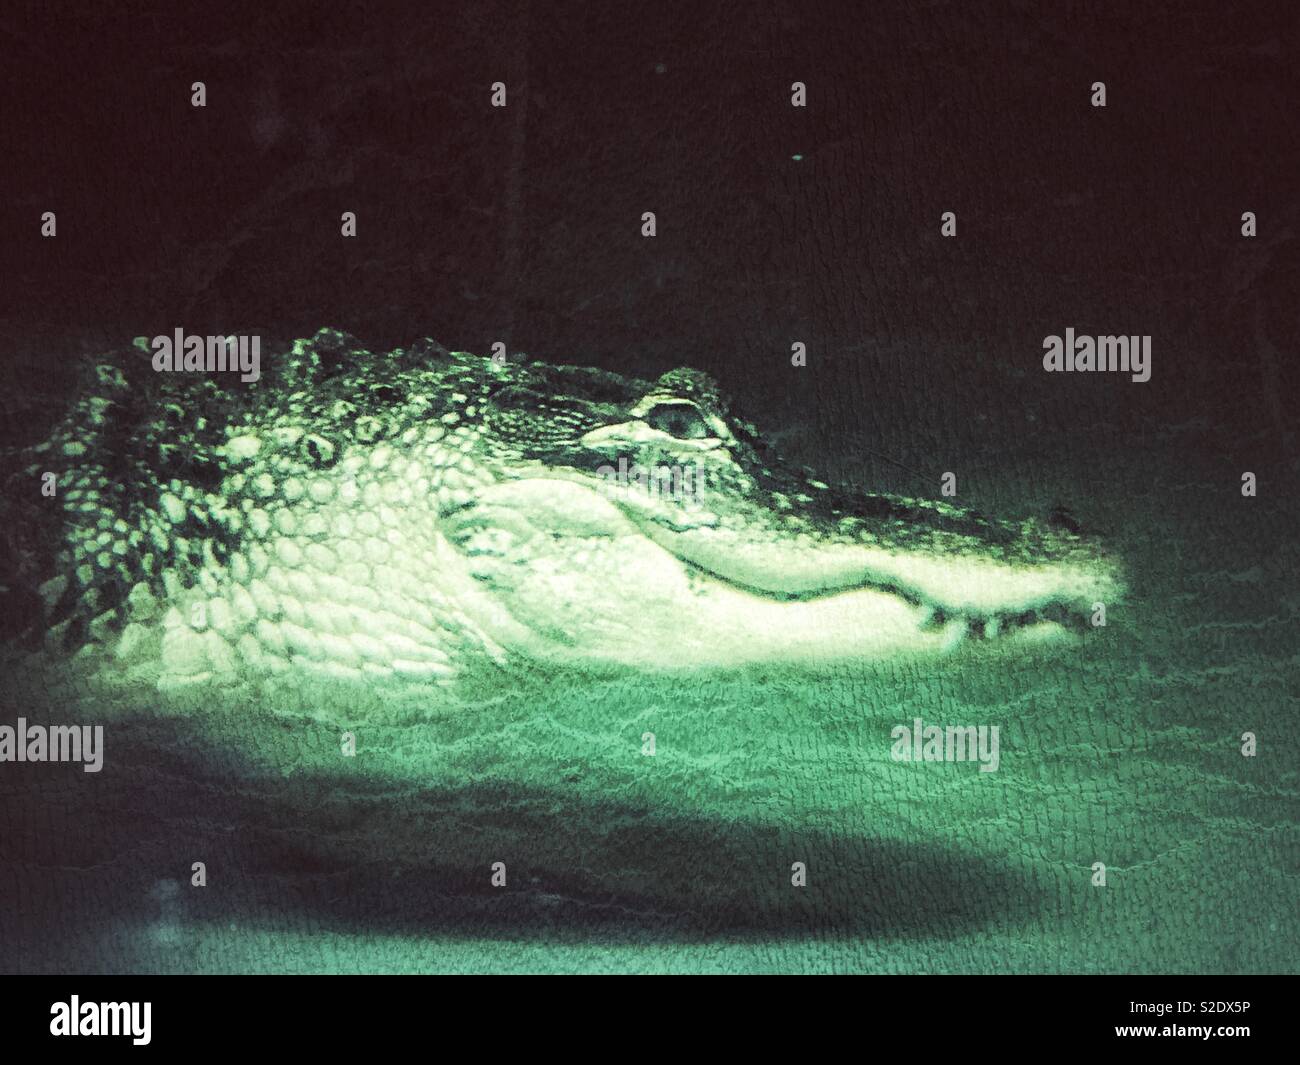 Creative side view portrait of alligator head swimming underwater looking at camera Stock Photo